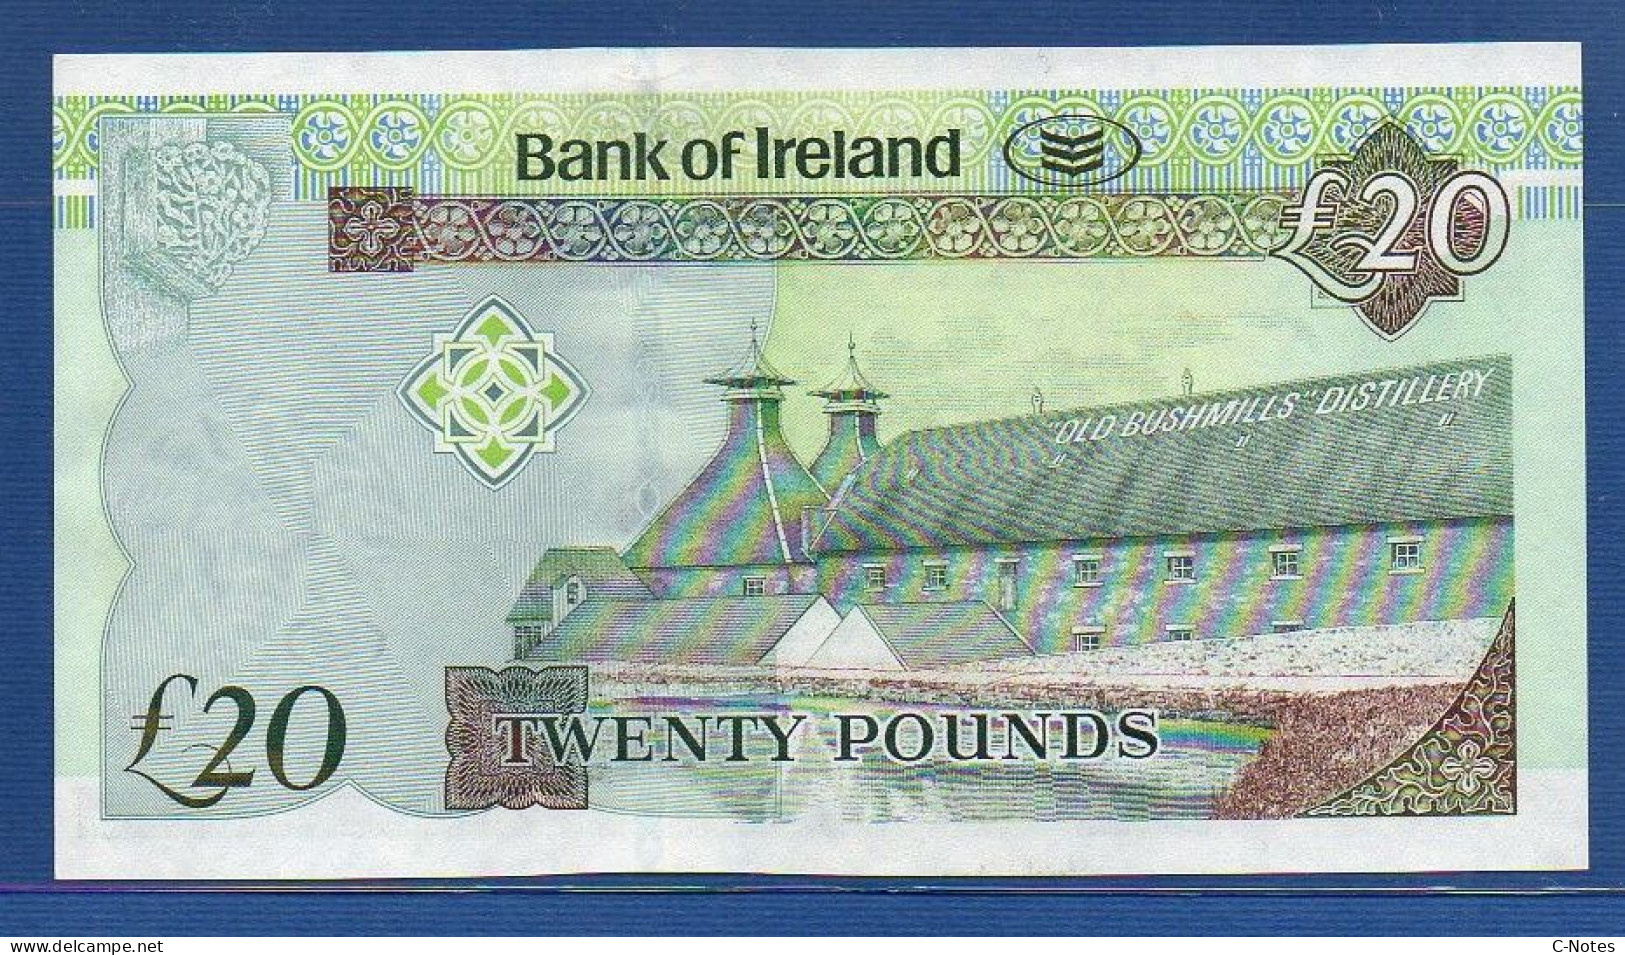 NORTHERN IRELAND - P. 88 – 20 POUNDS 2013 UNC, S/n AR565672  Bank Of Ireland - 20 Pounds